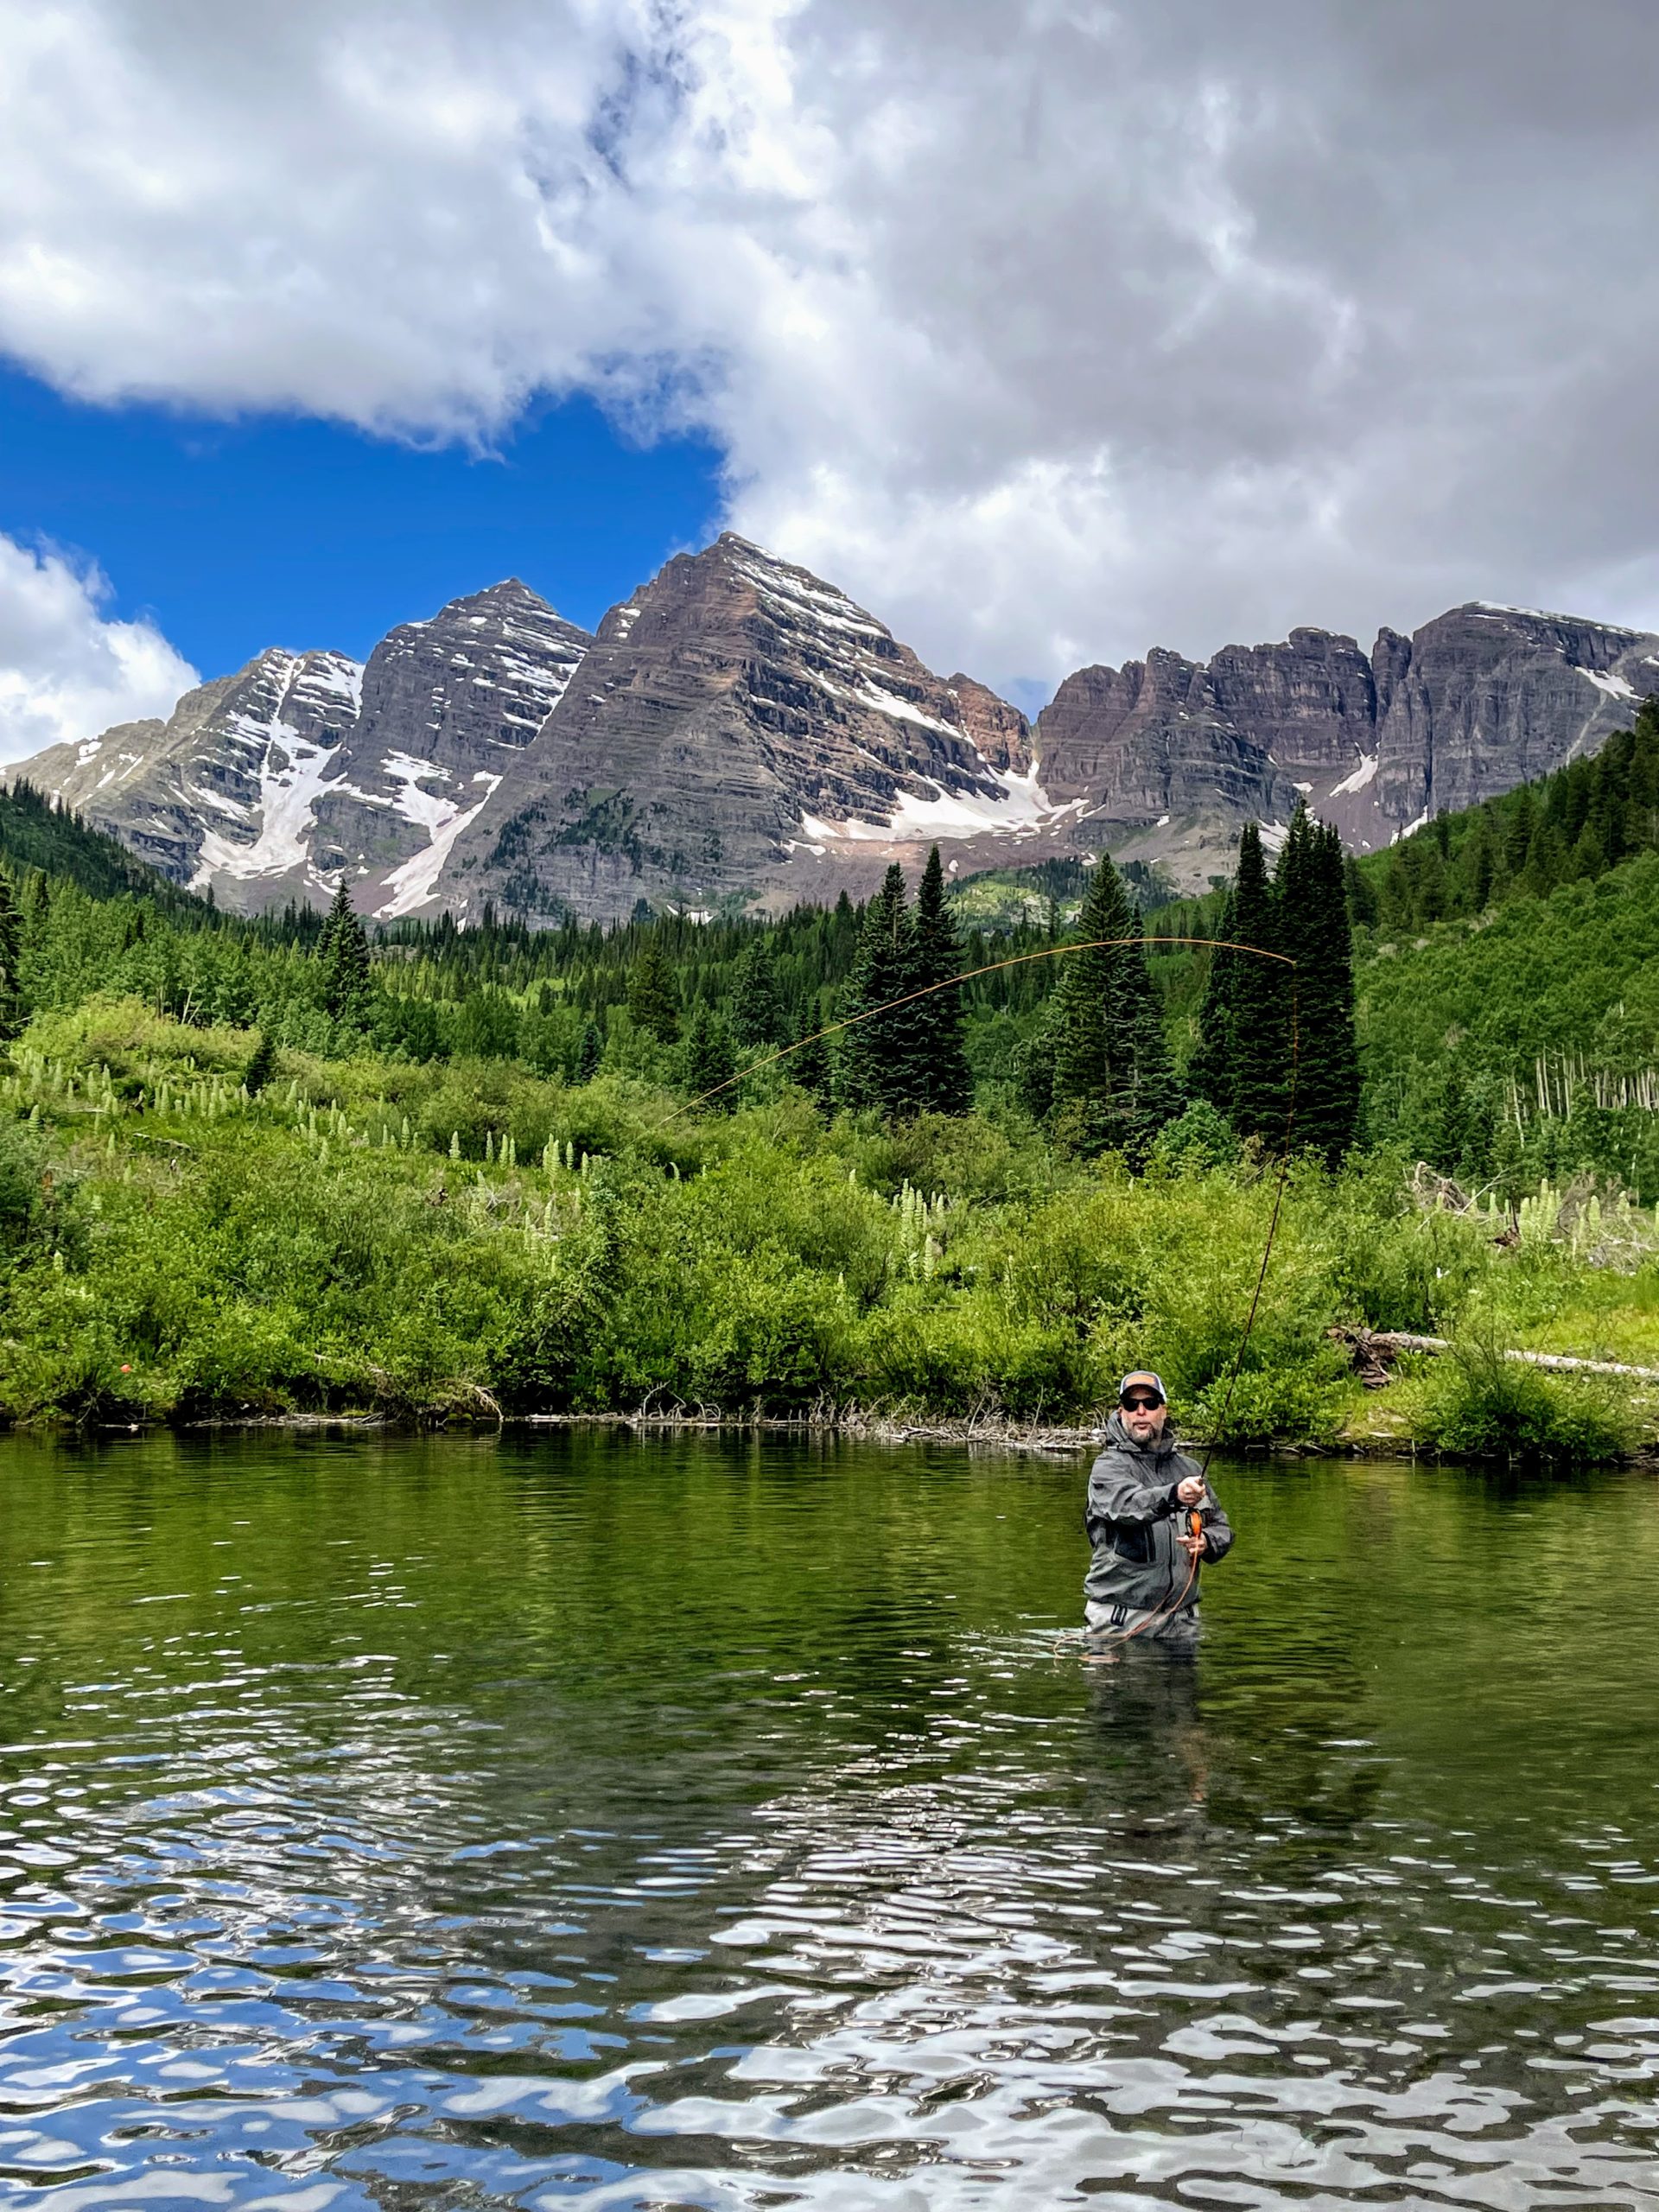 Fly fishing among the greenery and mountain view